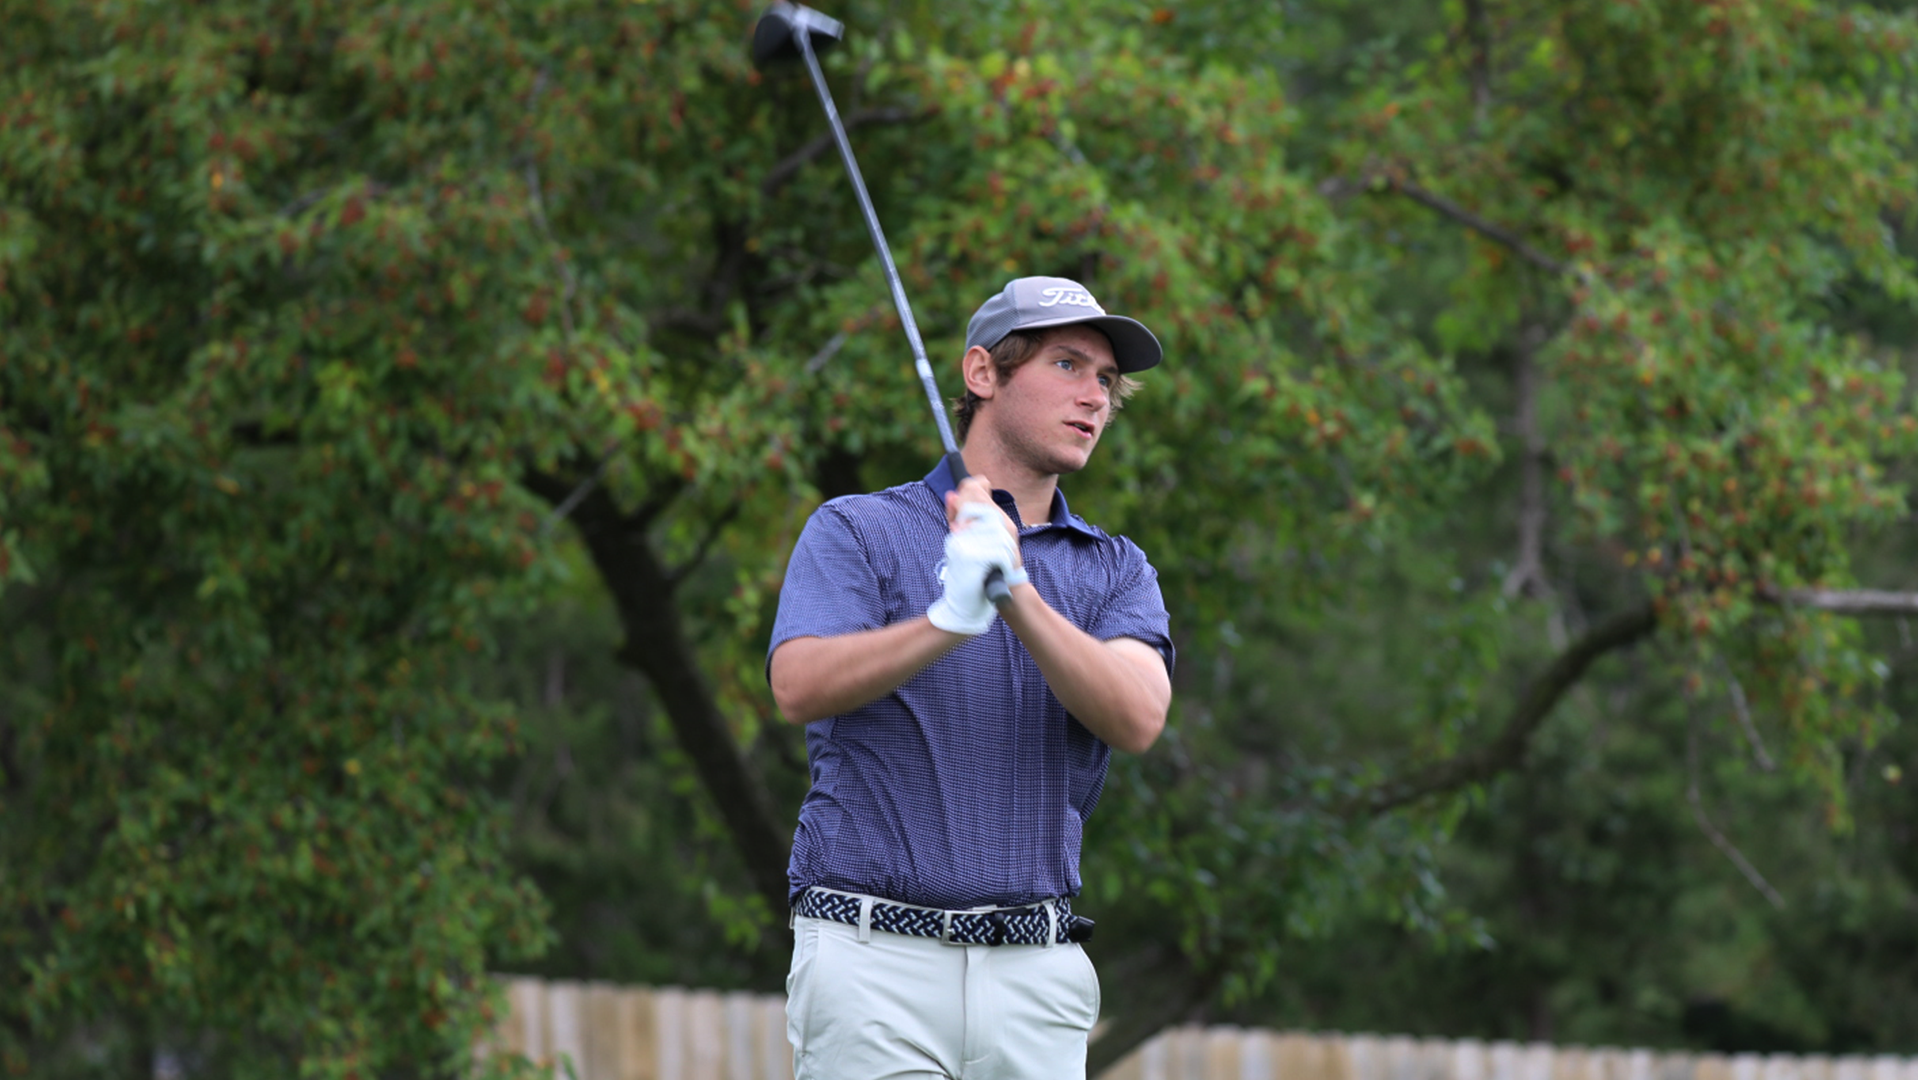 Charger golfers improve each round; take 16th as a team at Saint Leo Invite